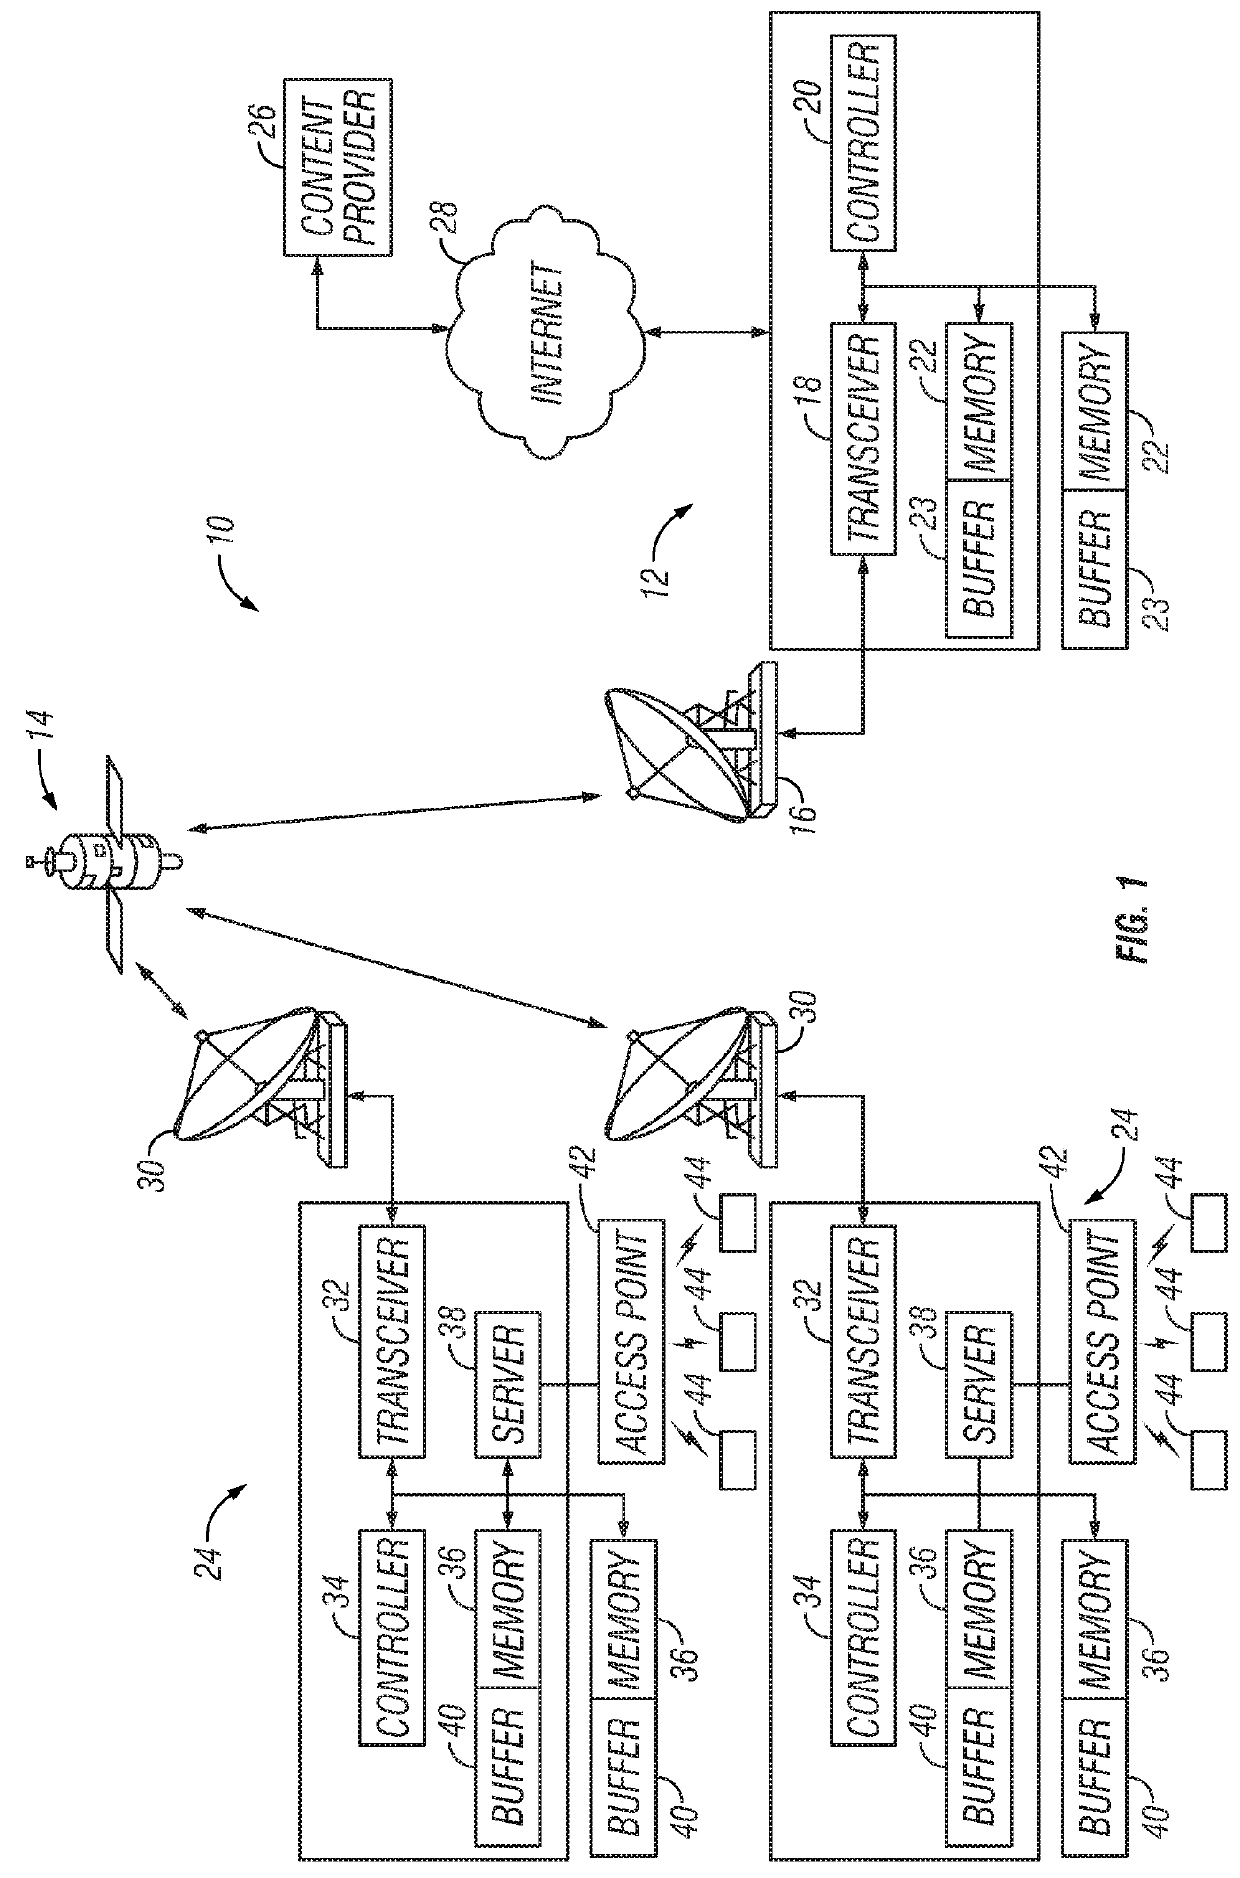 Data buffering control system and method for a communication network